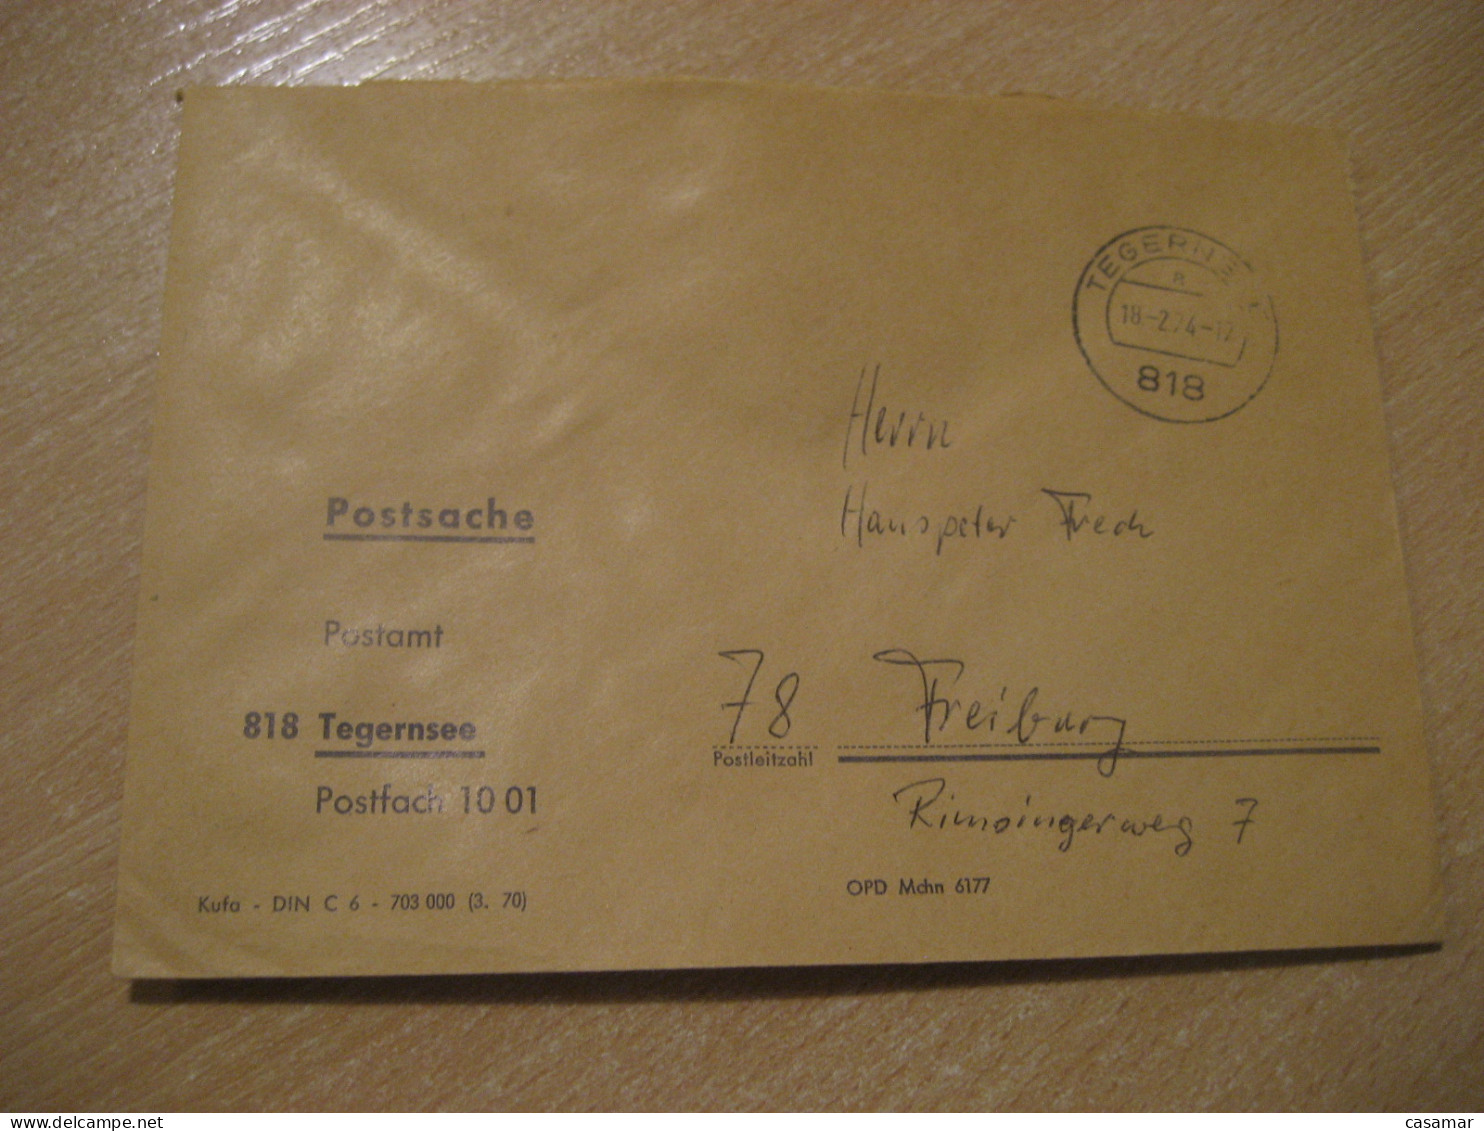 TEGERNSEE 1974 To Freiburg Postage Paid Cancel Cover GERMANY - Covers & Documents